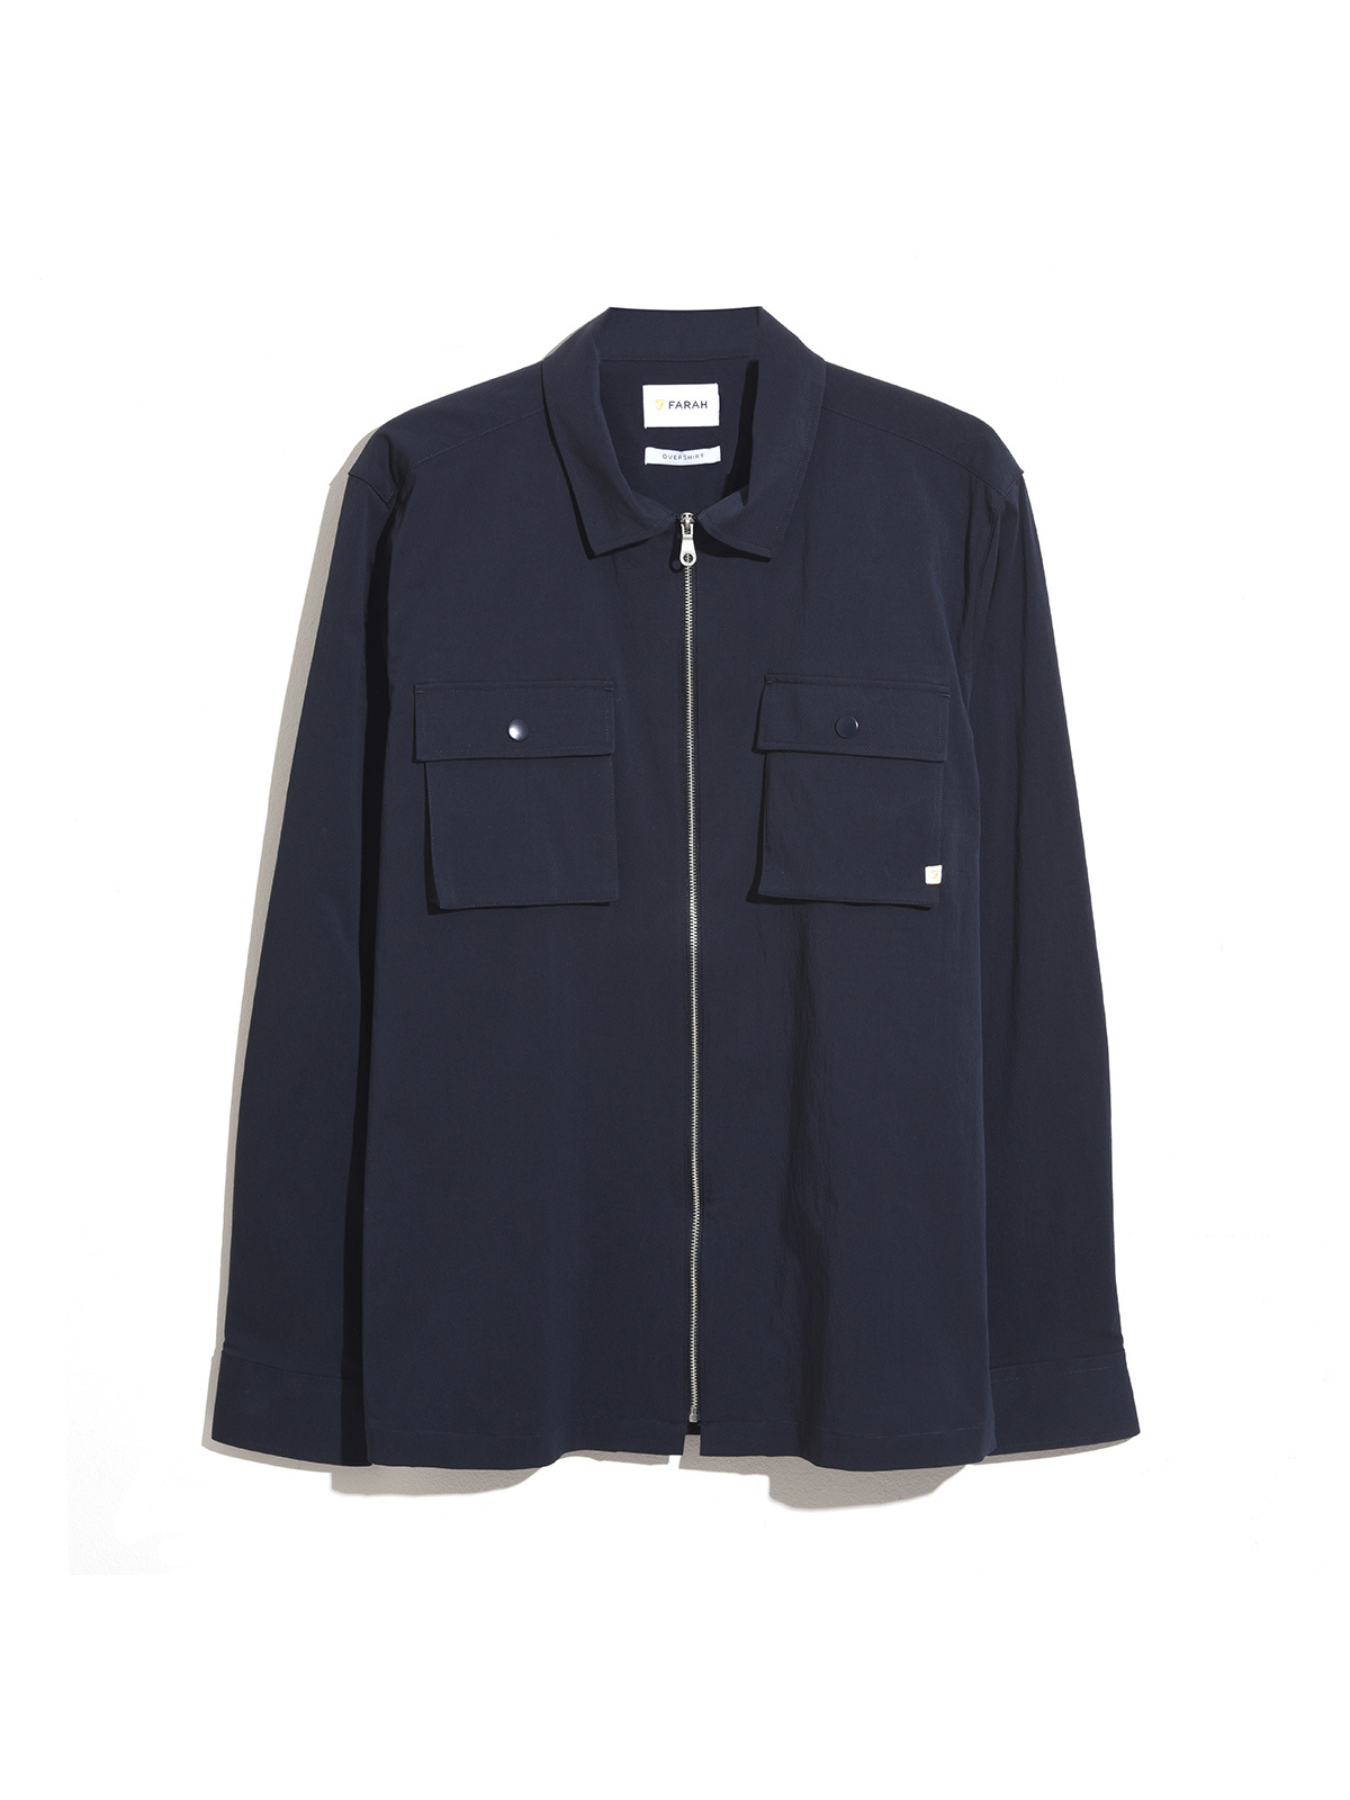 Lynden Relaxed Fit Long Sleeve Shirt In True Navy